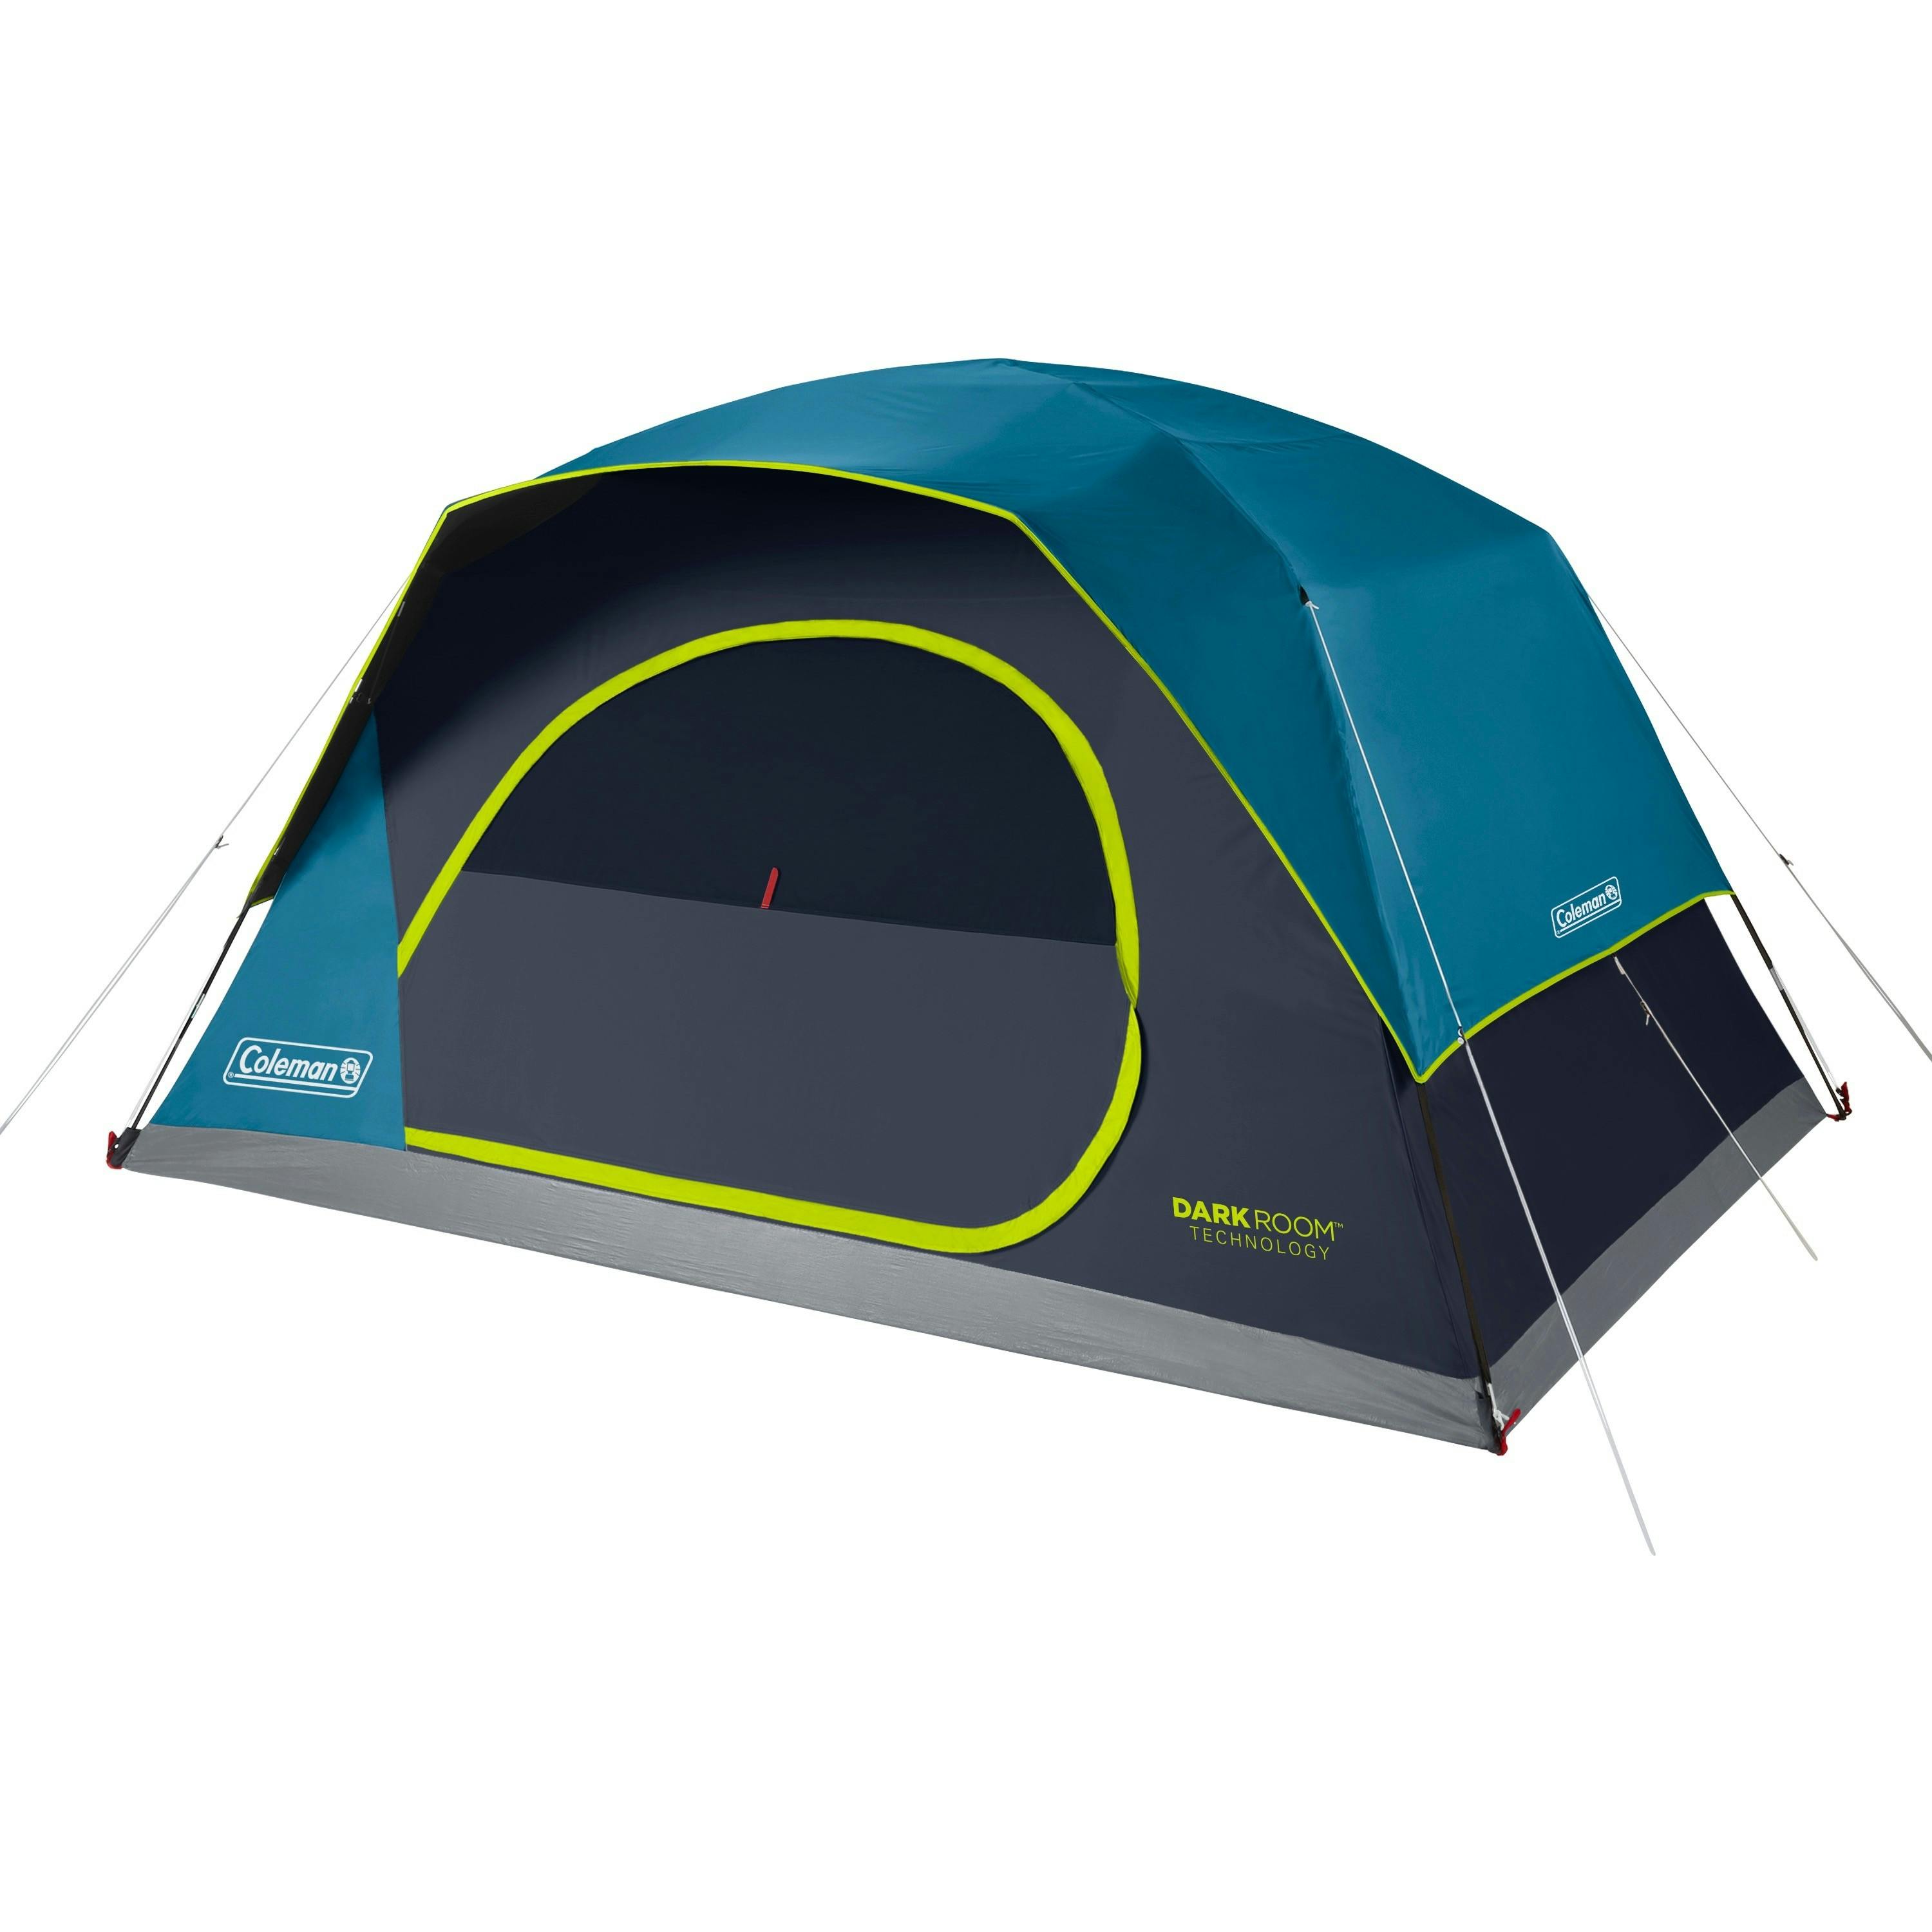 Coleman Skydome™ Camping Tent with Dark Room Technology · 8 Person